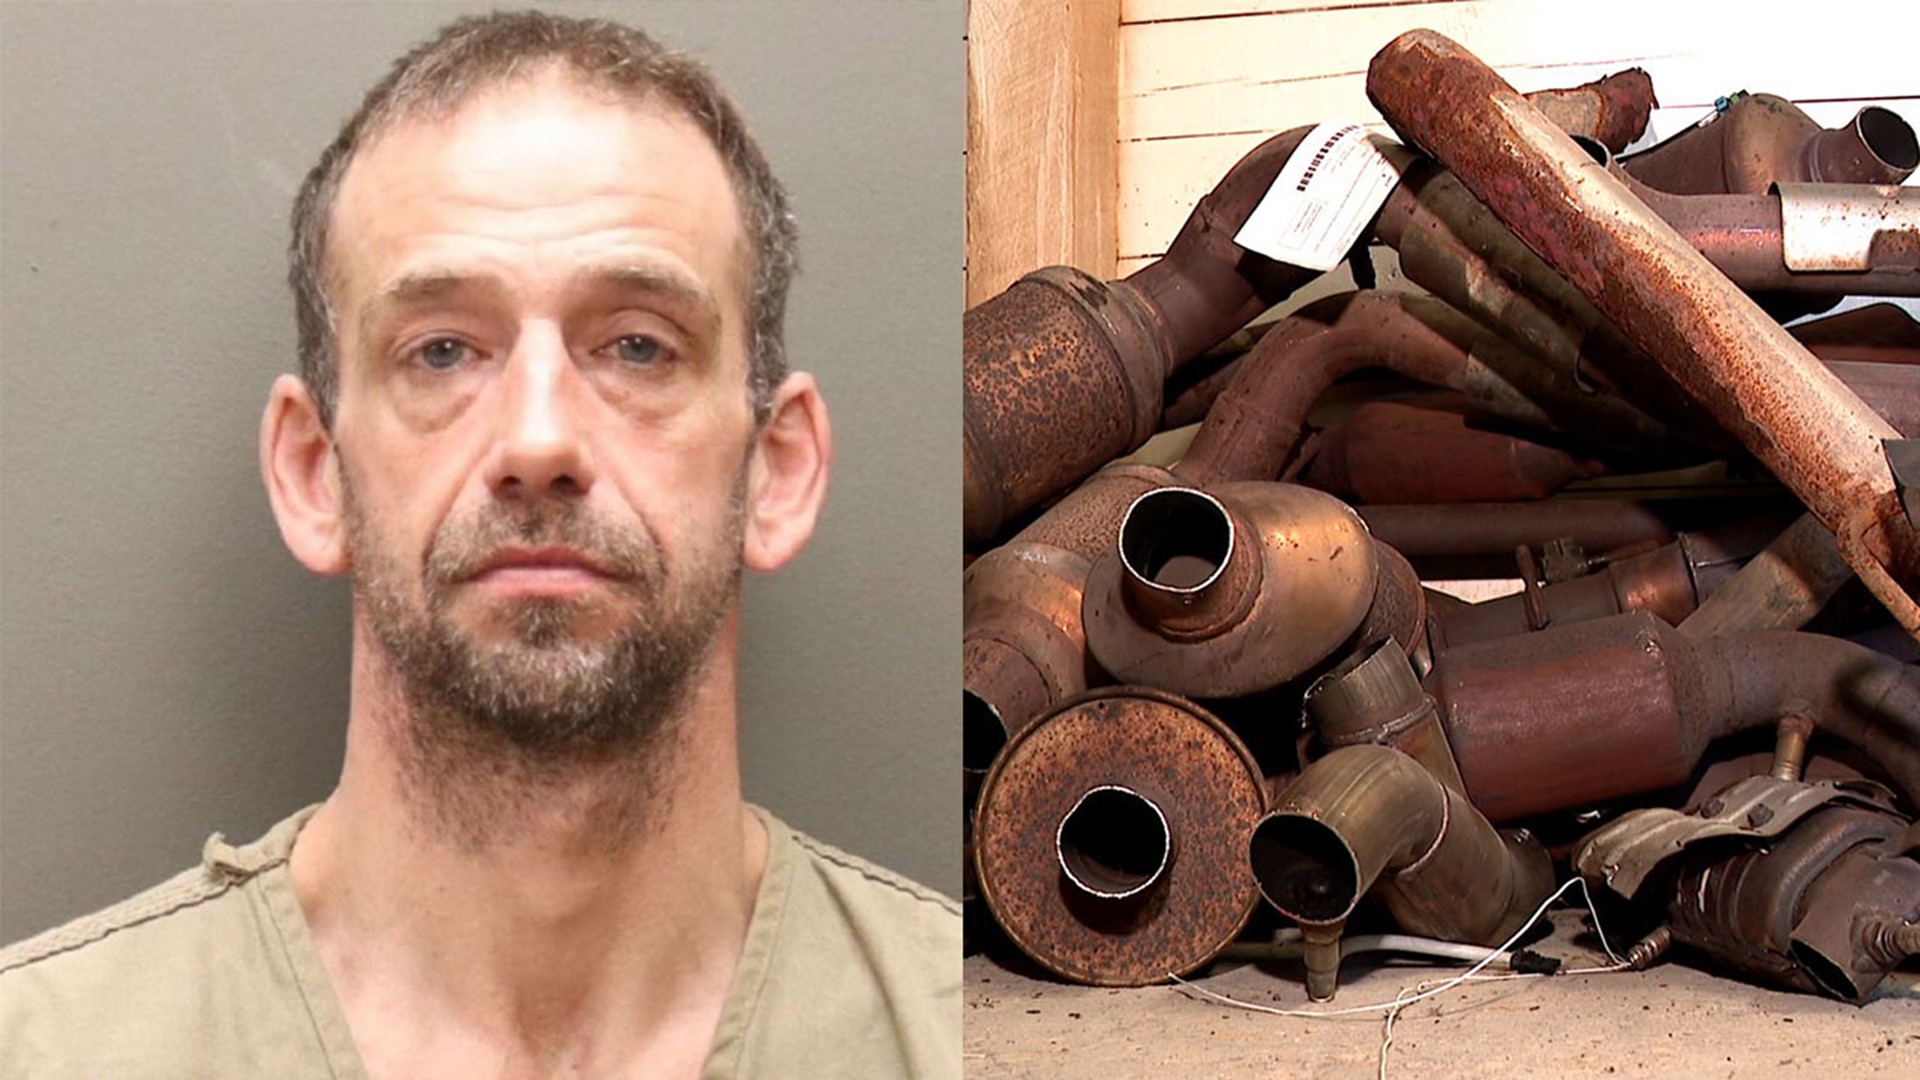 Tommy Cox entered a guilty plea Wednesday to 15 felonies in connection with a string of catalytic converter thefts.